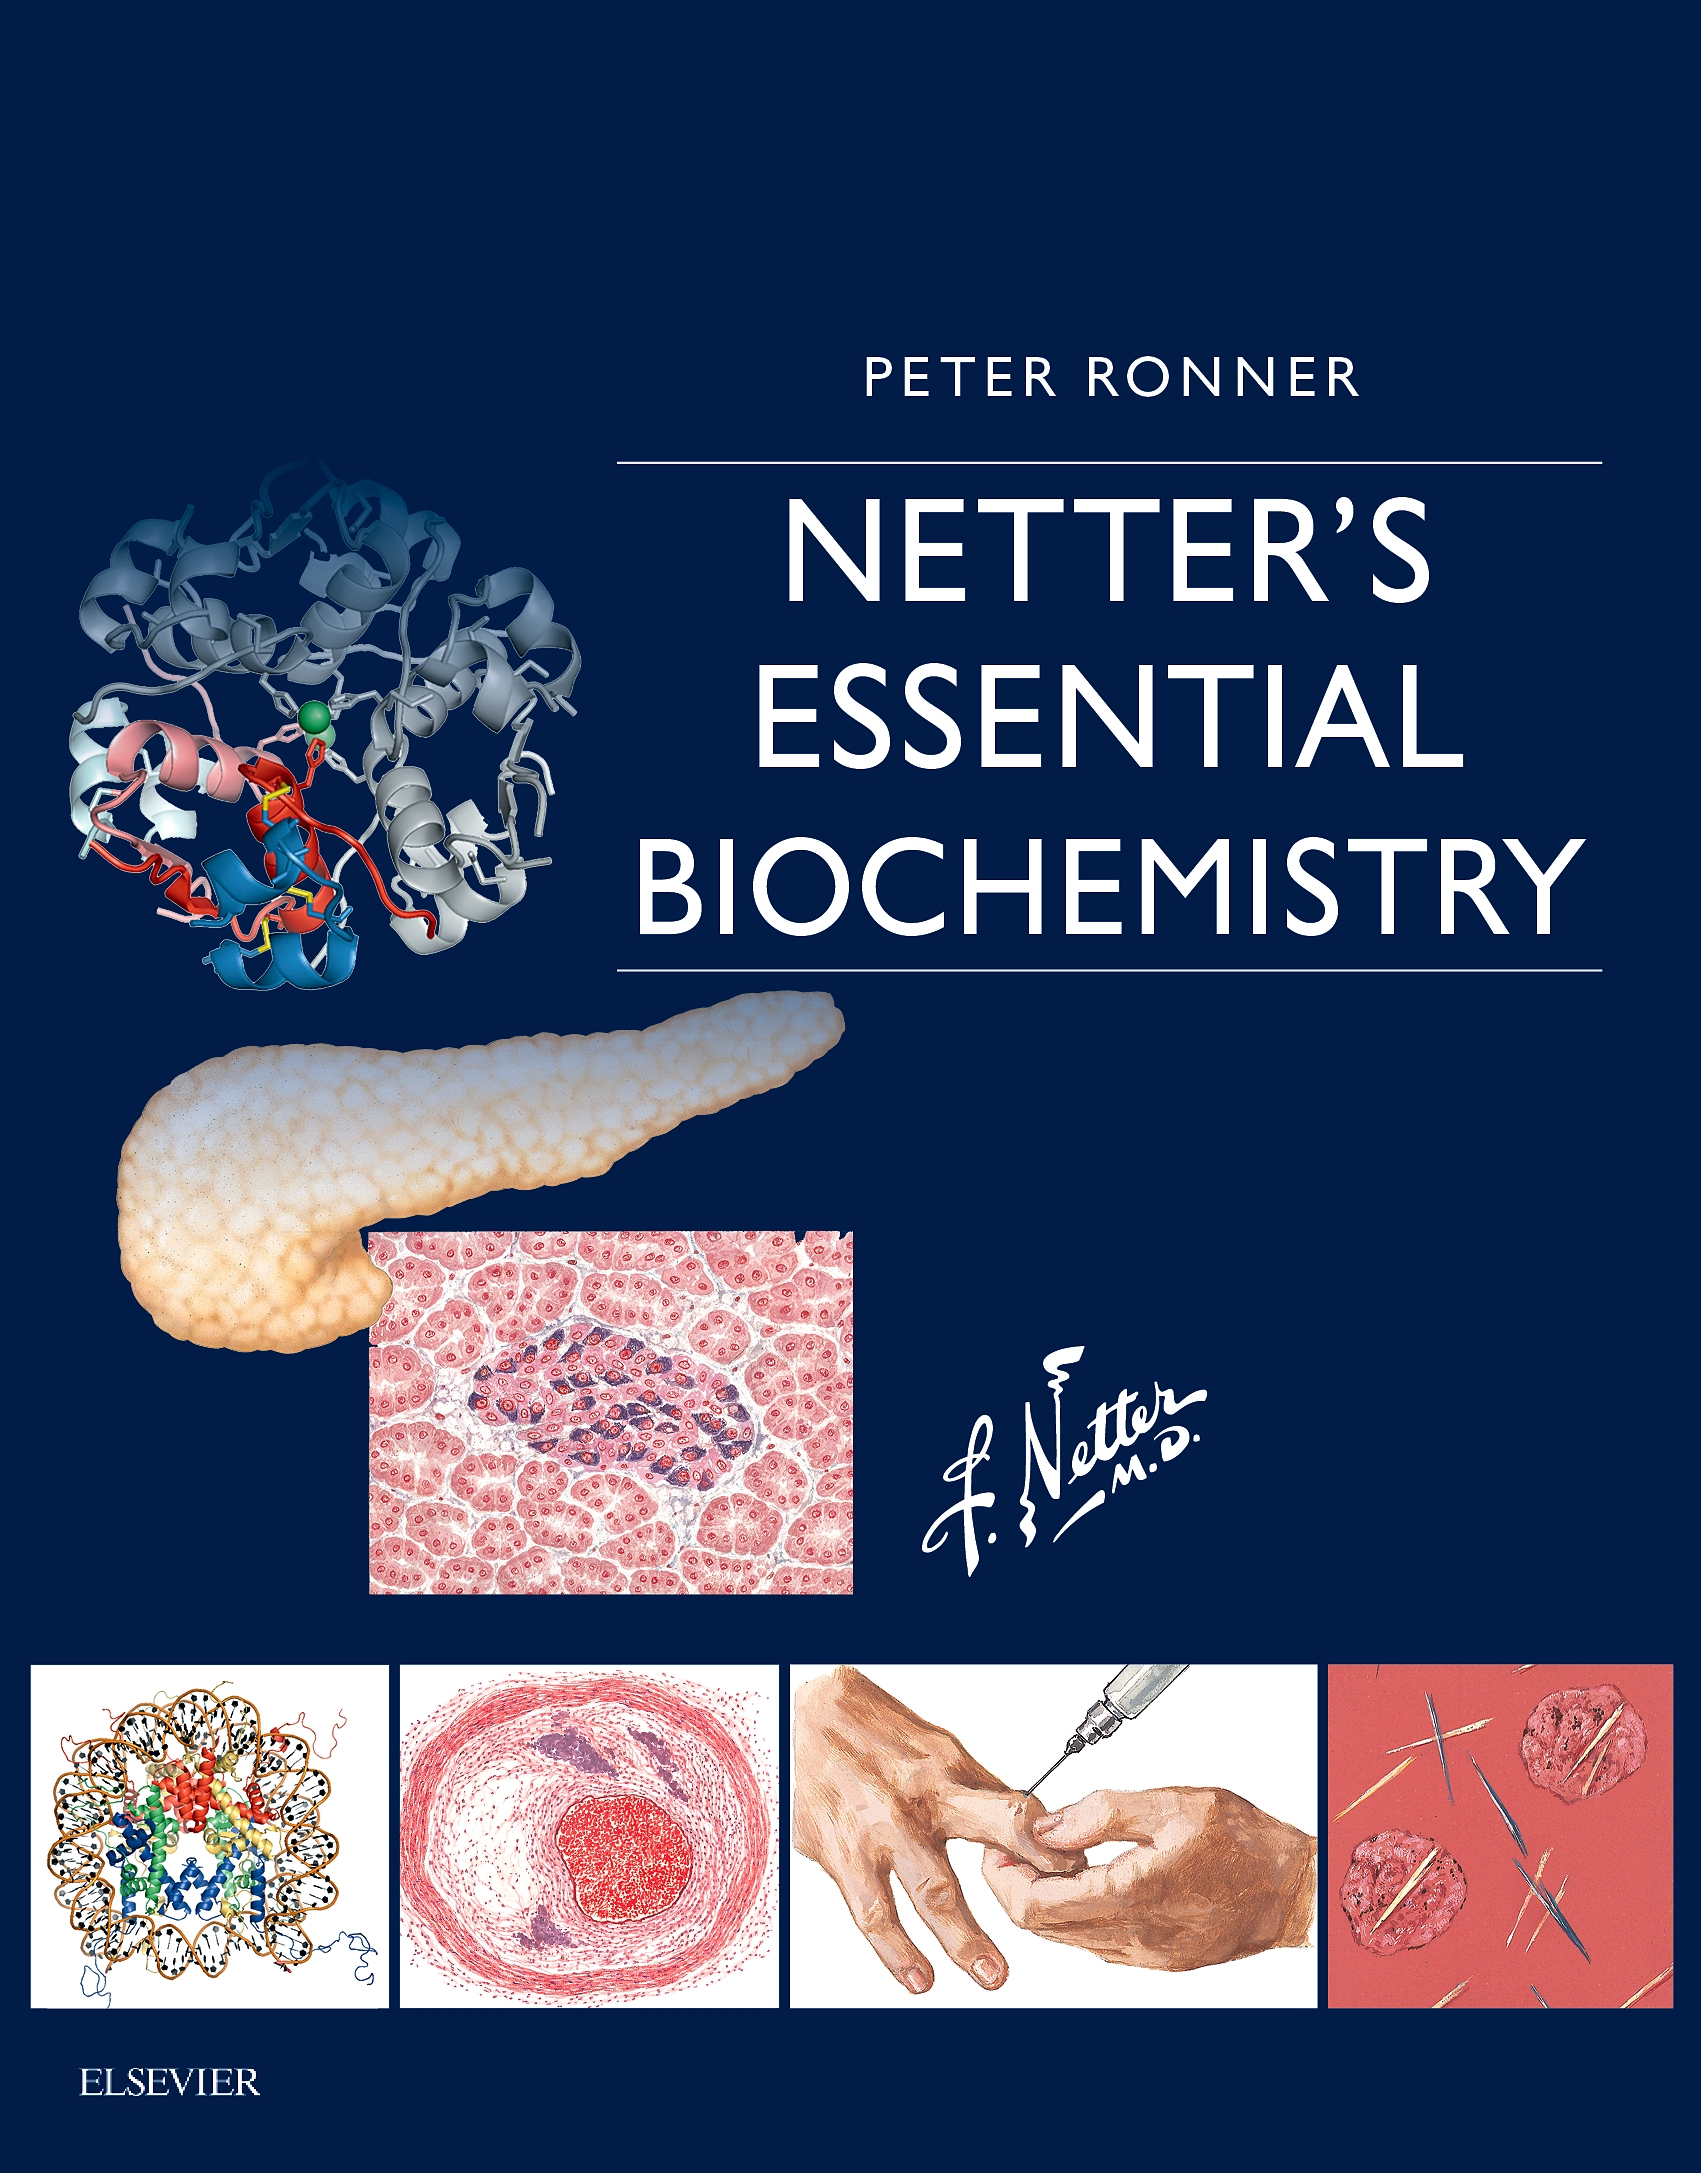 Evolve Resources for Netter's Essential Biochemistry, 1st Edition